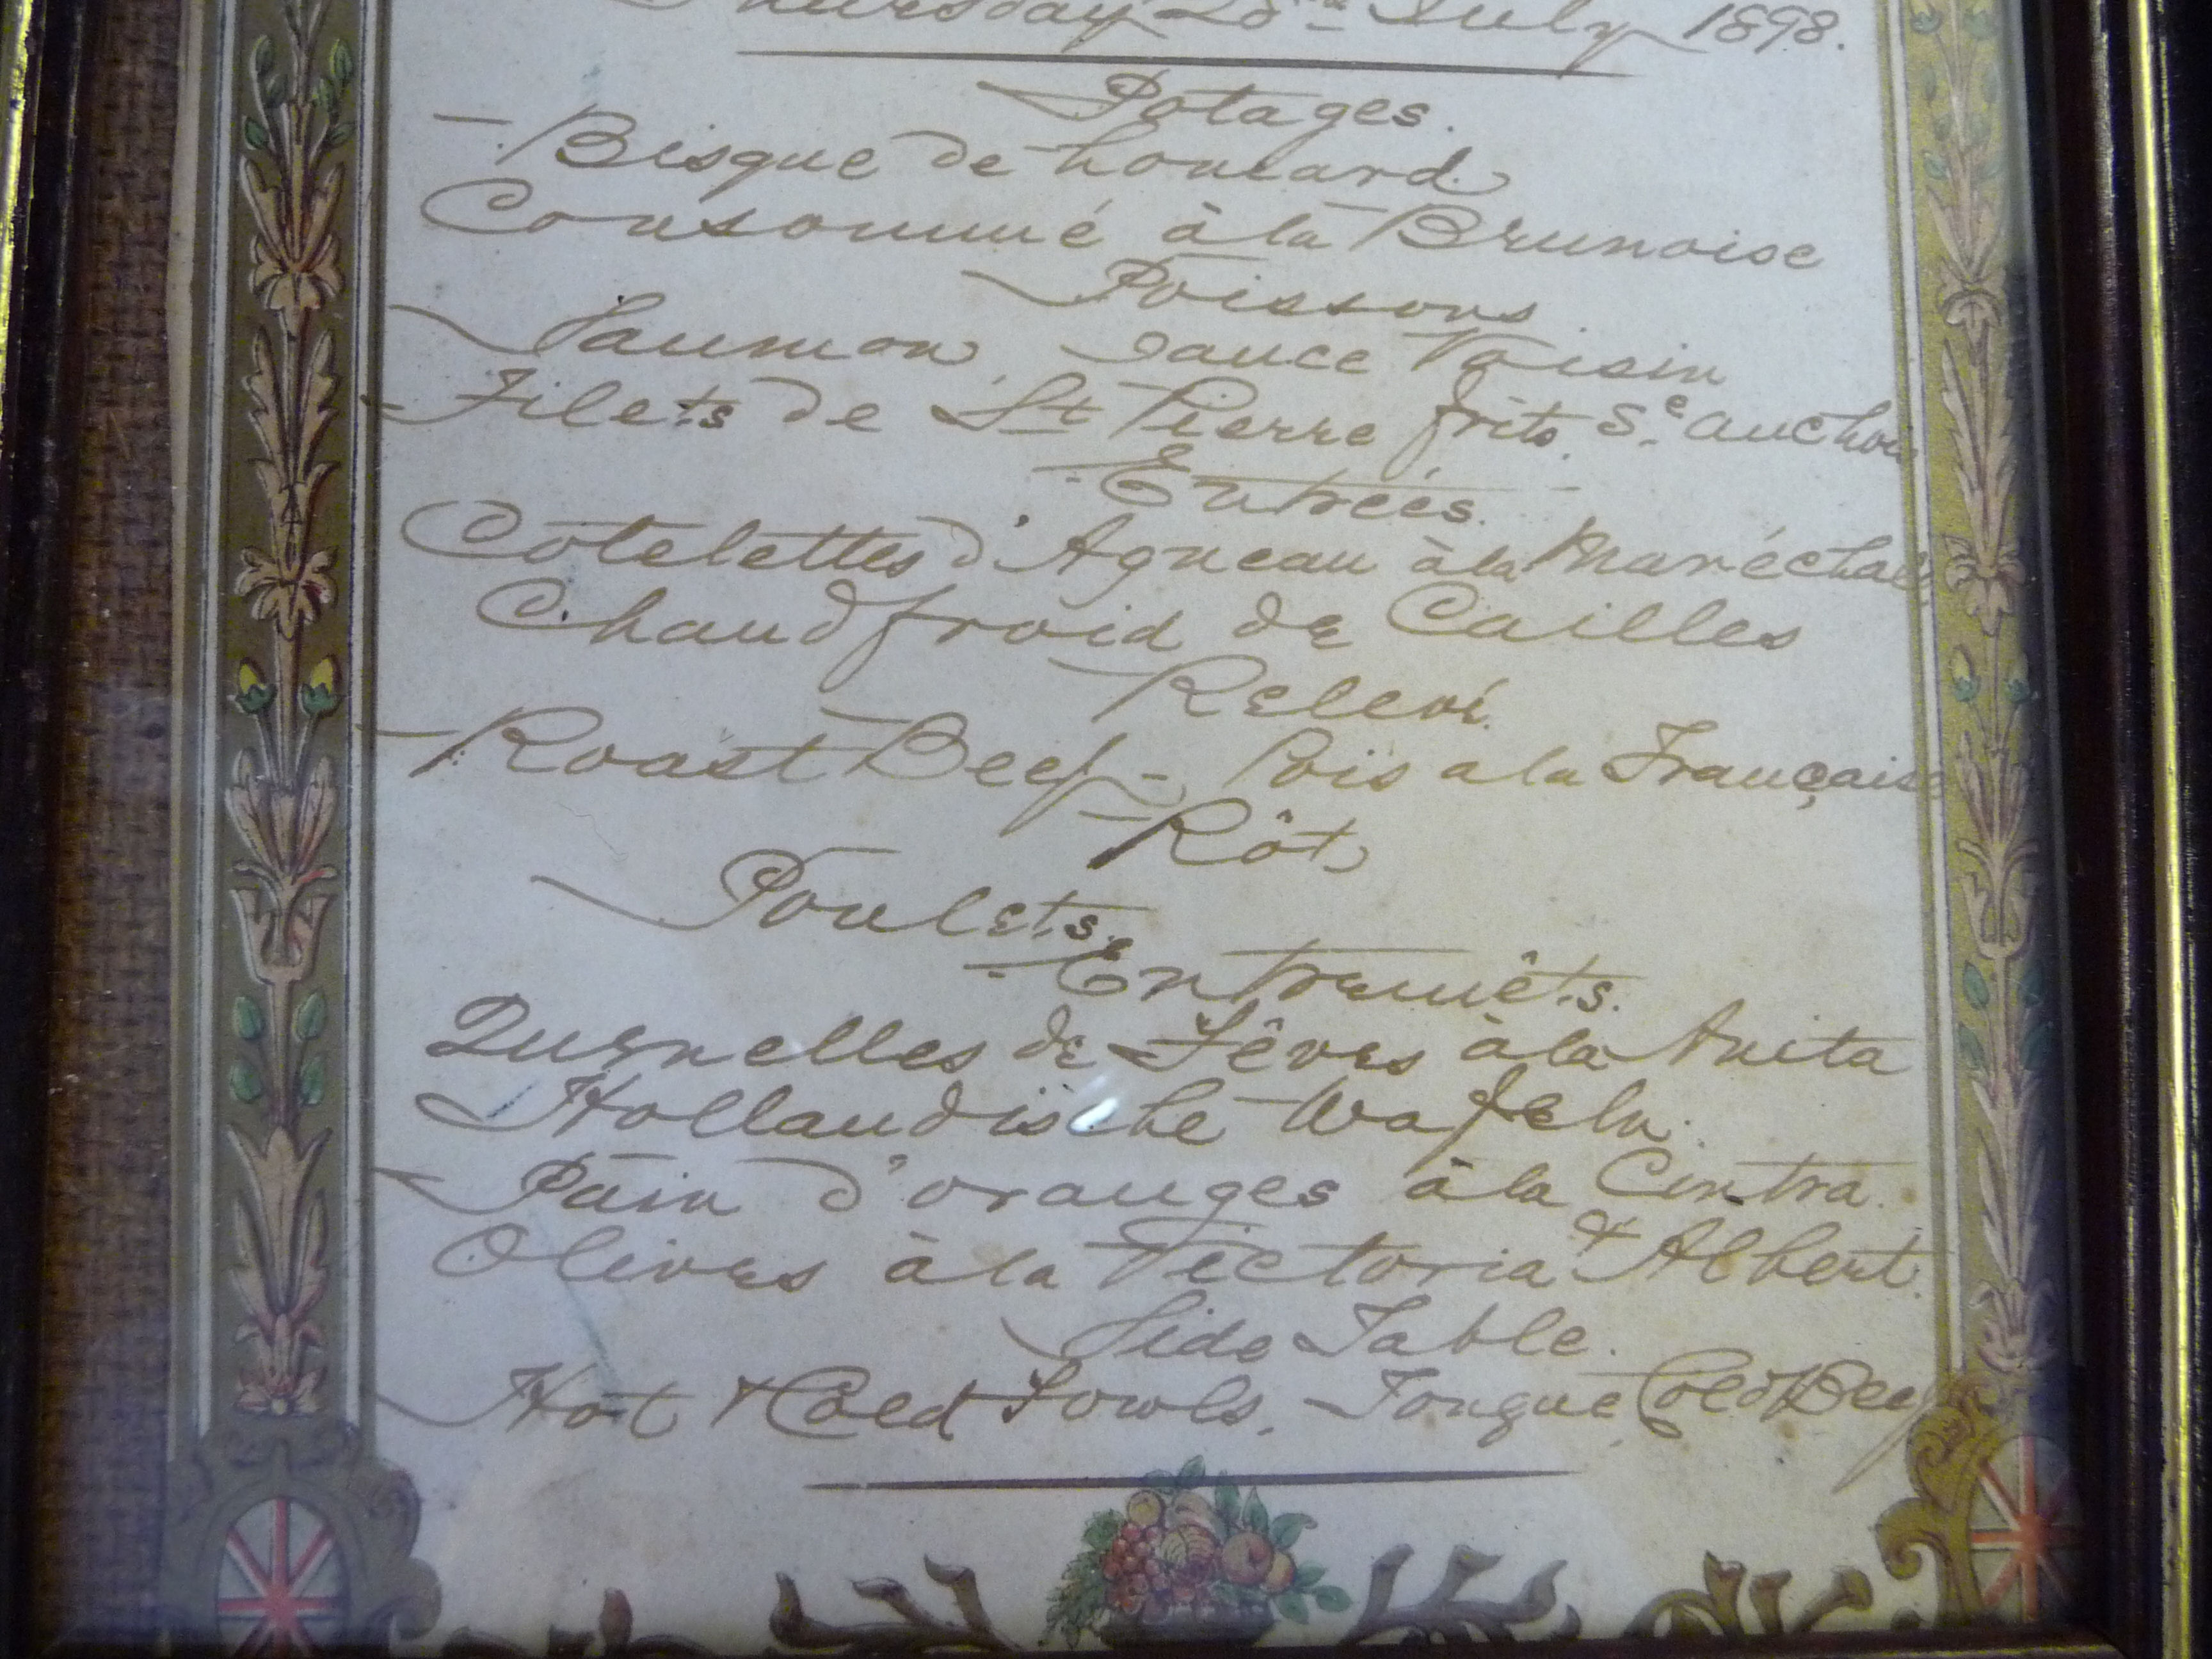 A handwritten menu for Her Majesty's dinner at Osborne House on Thursday 28th July 1898 7'' x 5'' - Image 5 of 6